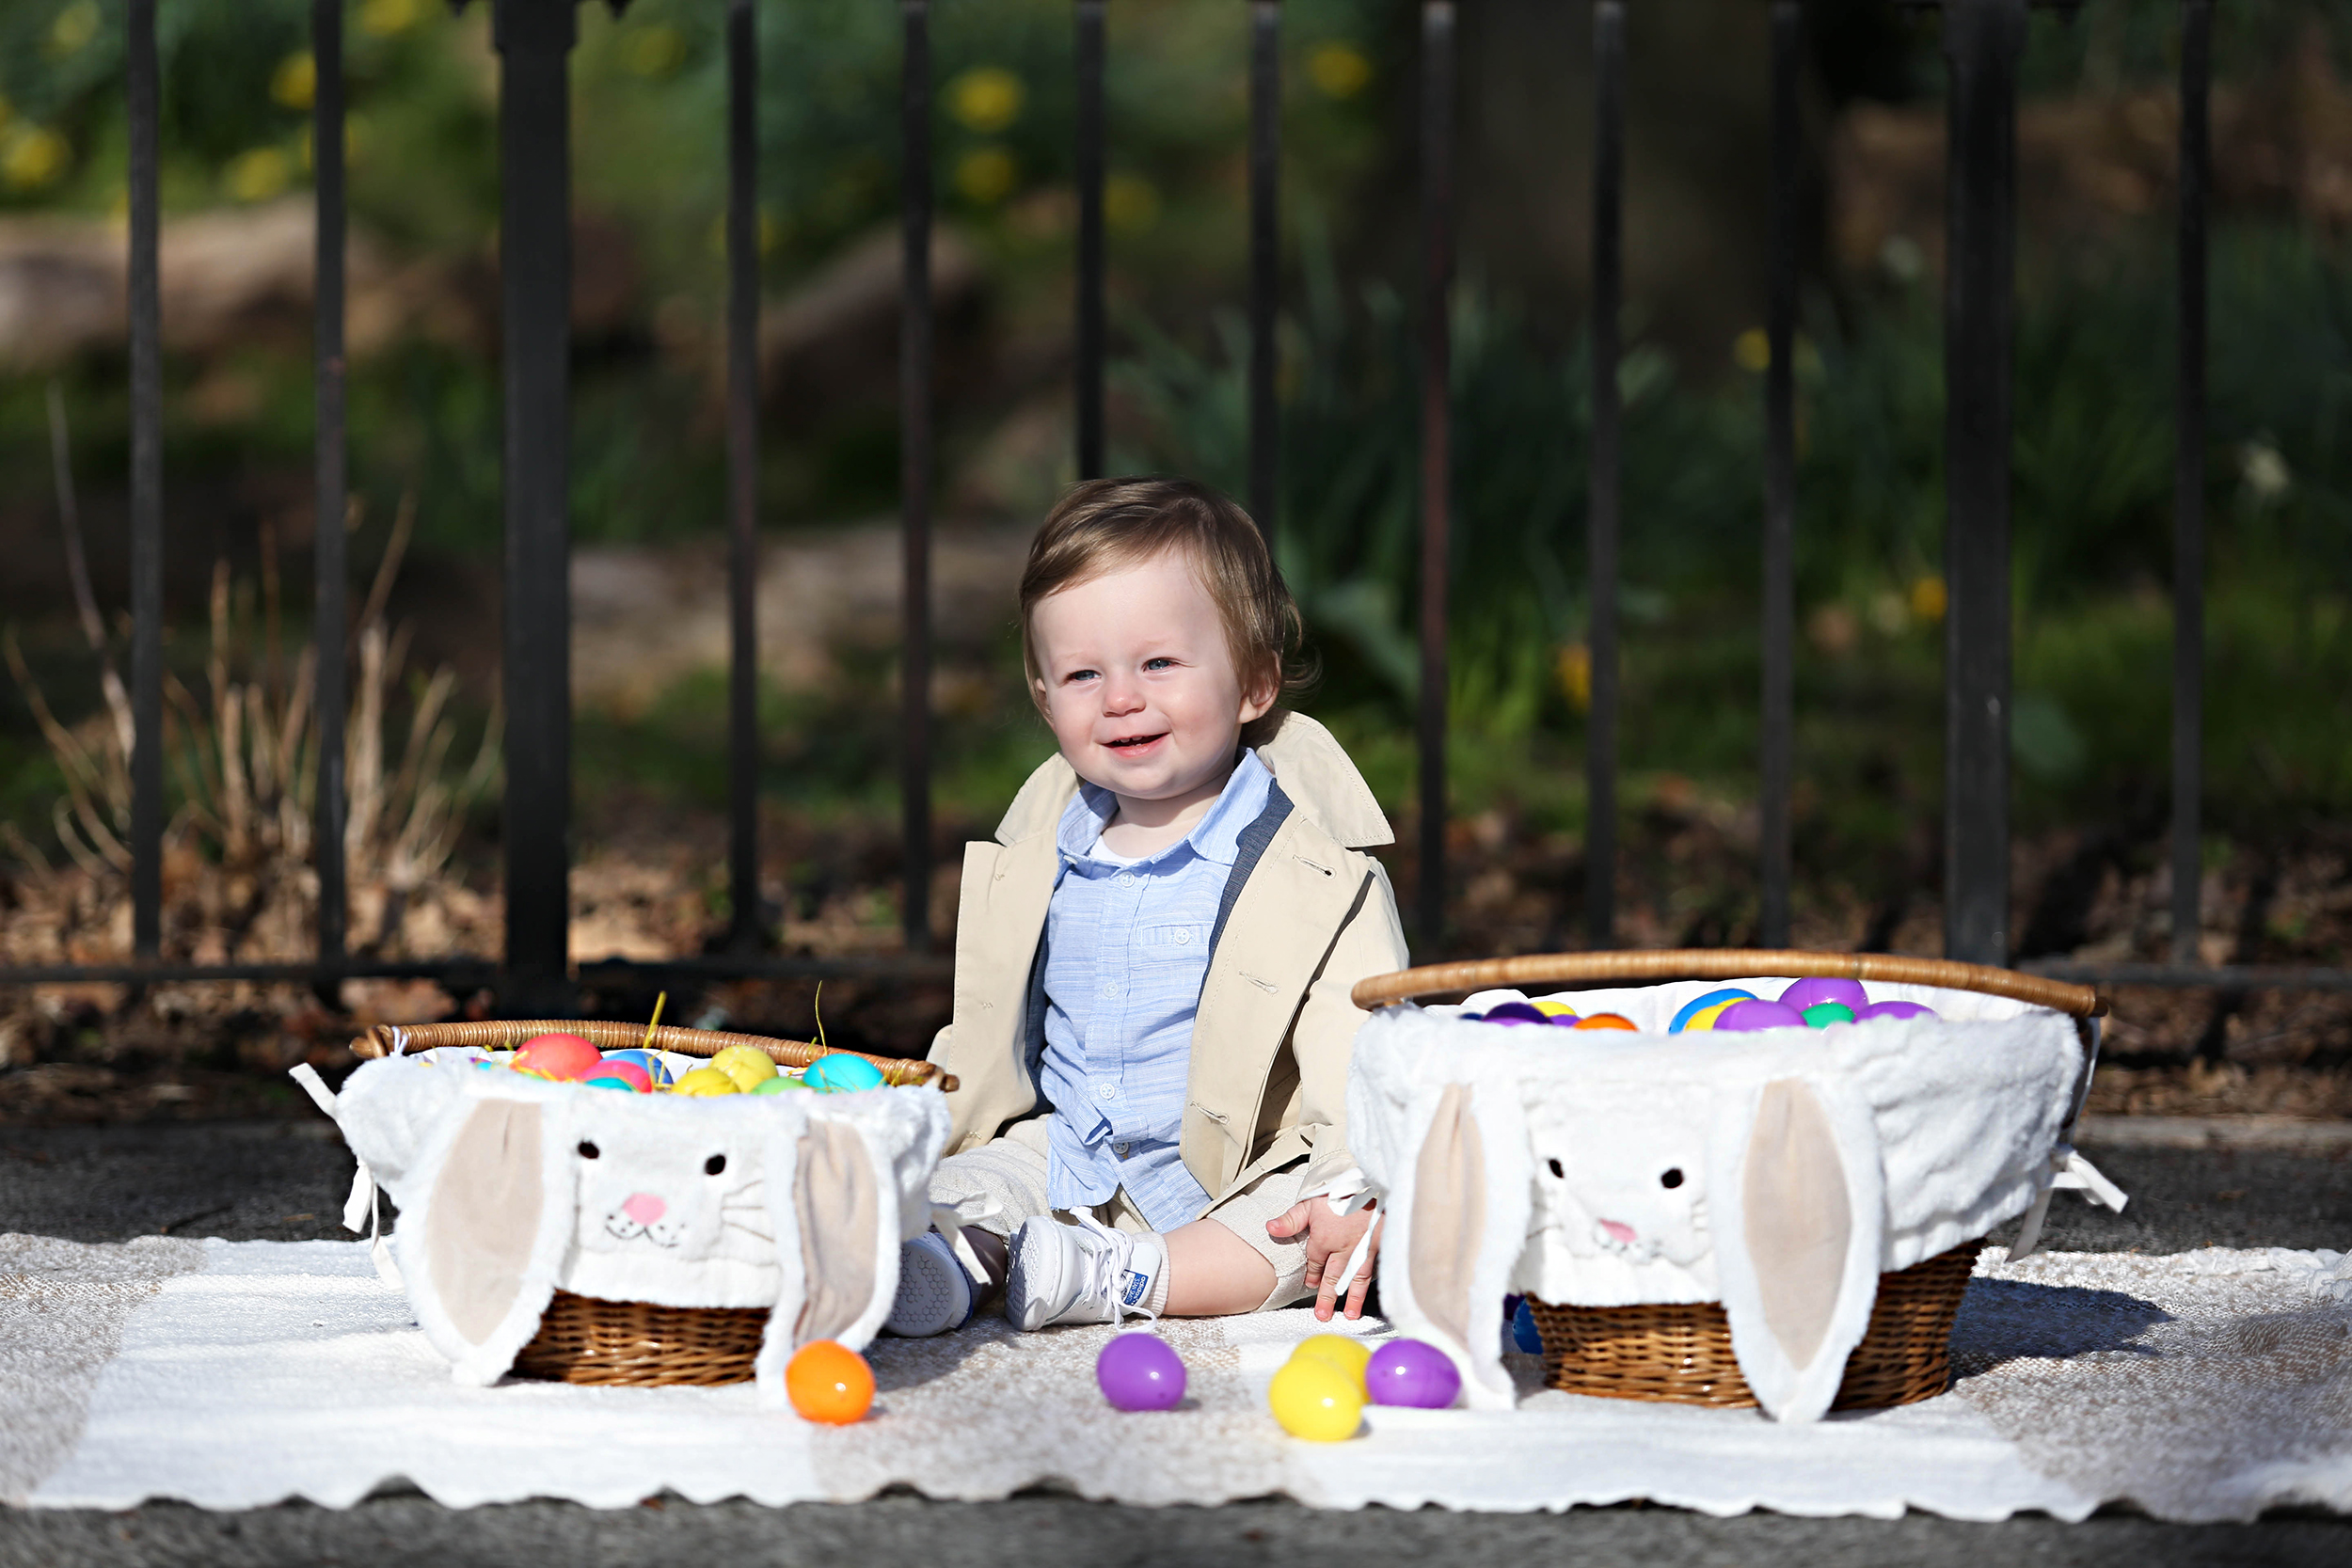 Easter Decorations | Kids Easter Party | Easter Ideas for Kids | Nate's First Easter Party | Brooklyn Blonde x Pottery Barn Kids | Brooklyn Blonde